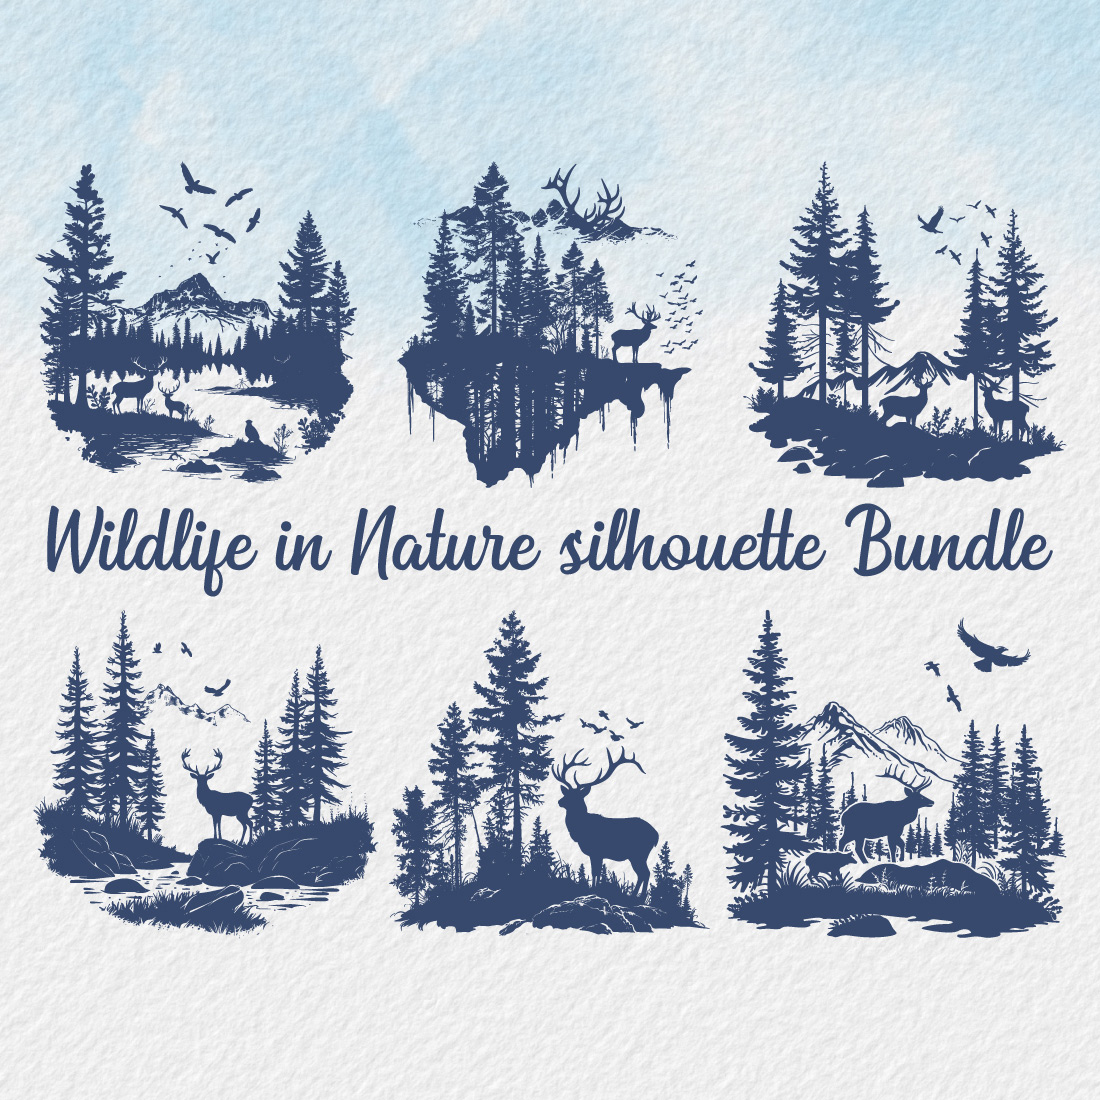 Wildlife in Nature Silhouette bundle, wild animal wildlife silhouette, forest silhouette illustration, Beautiful design for wildlife preservation, environmental awareness, deer, birds, bears trees, mountains cover image.